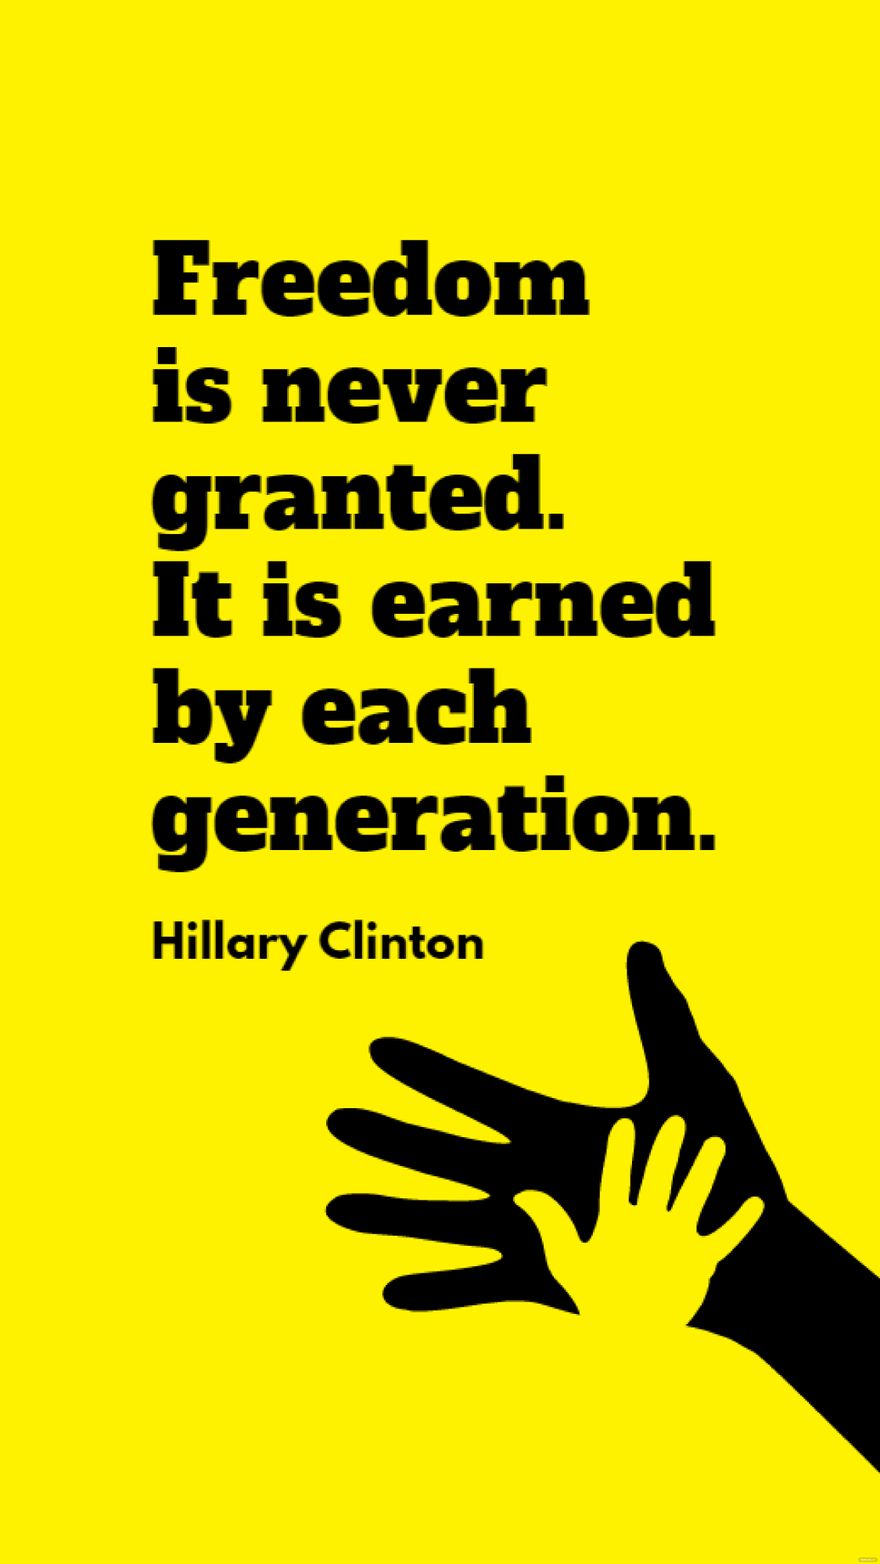 Hillary Clinton - Freedom is never granted. It is earned by each generation.